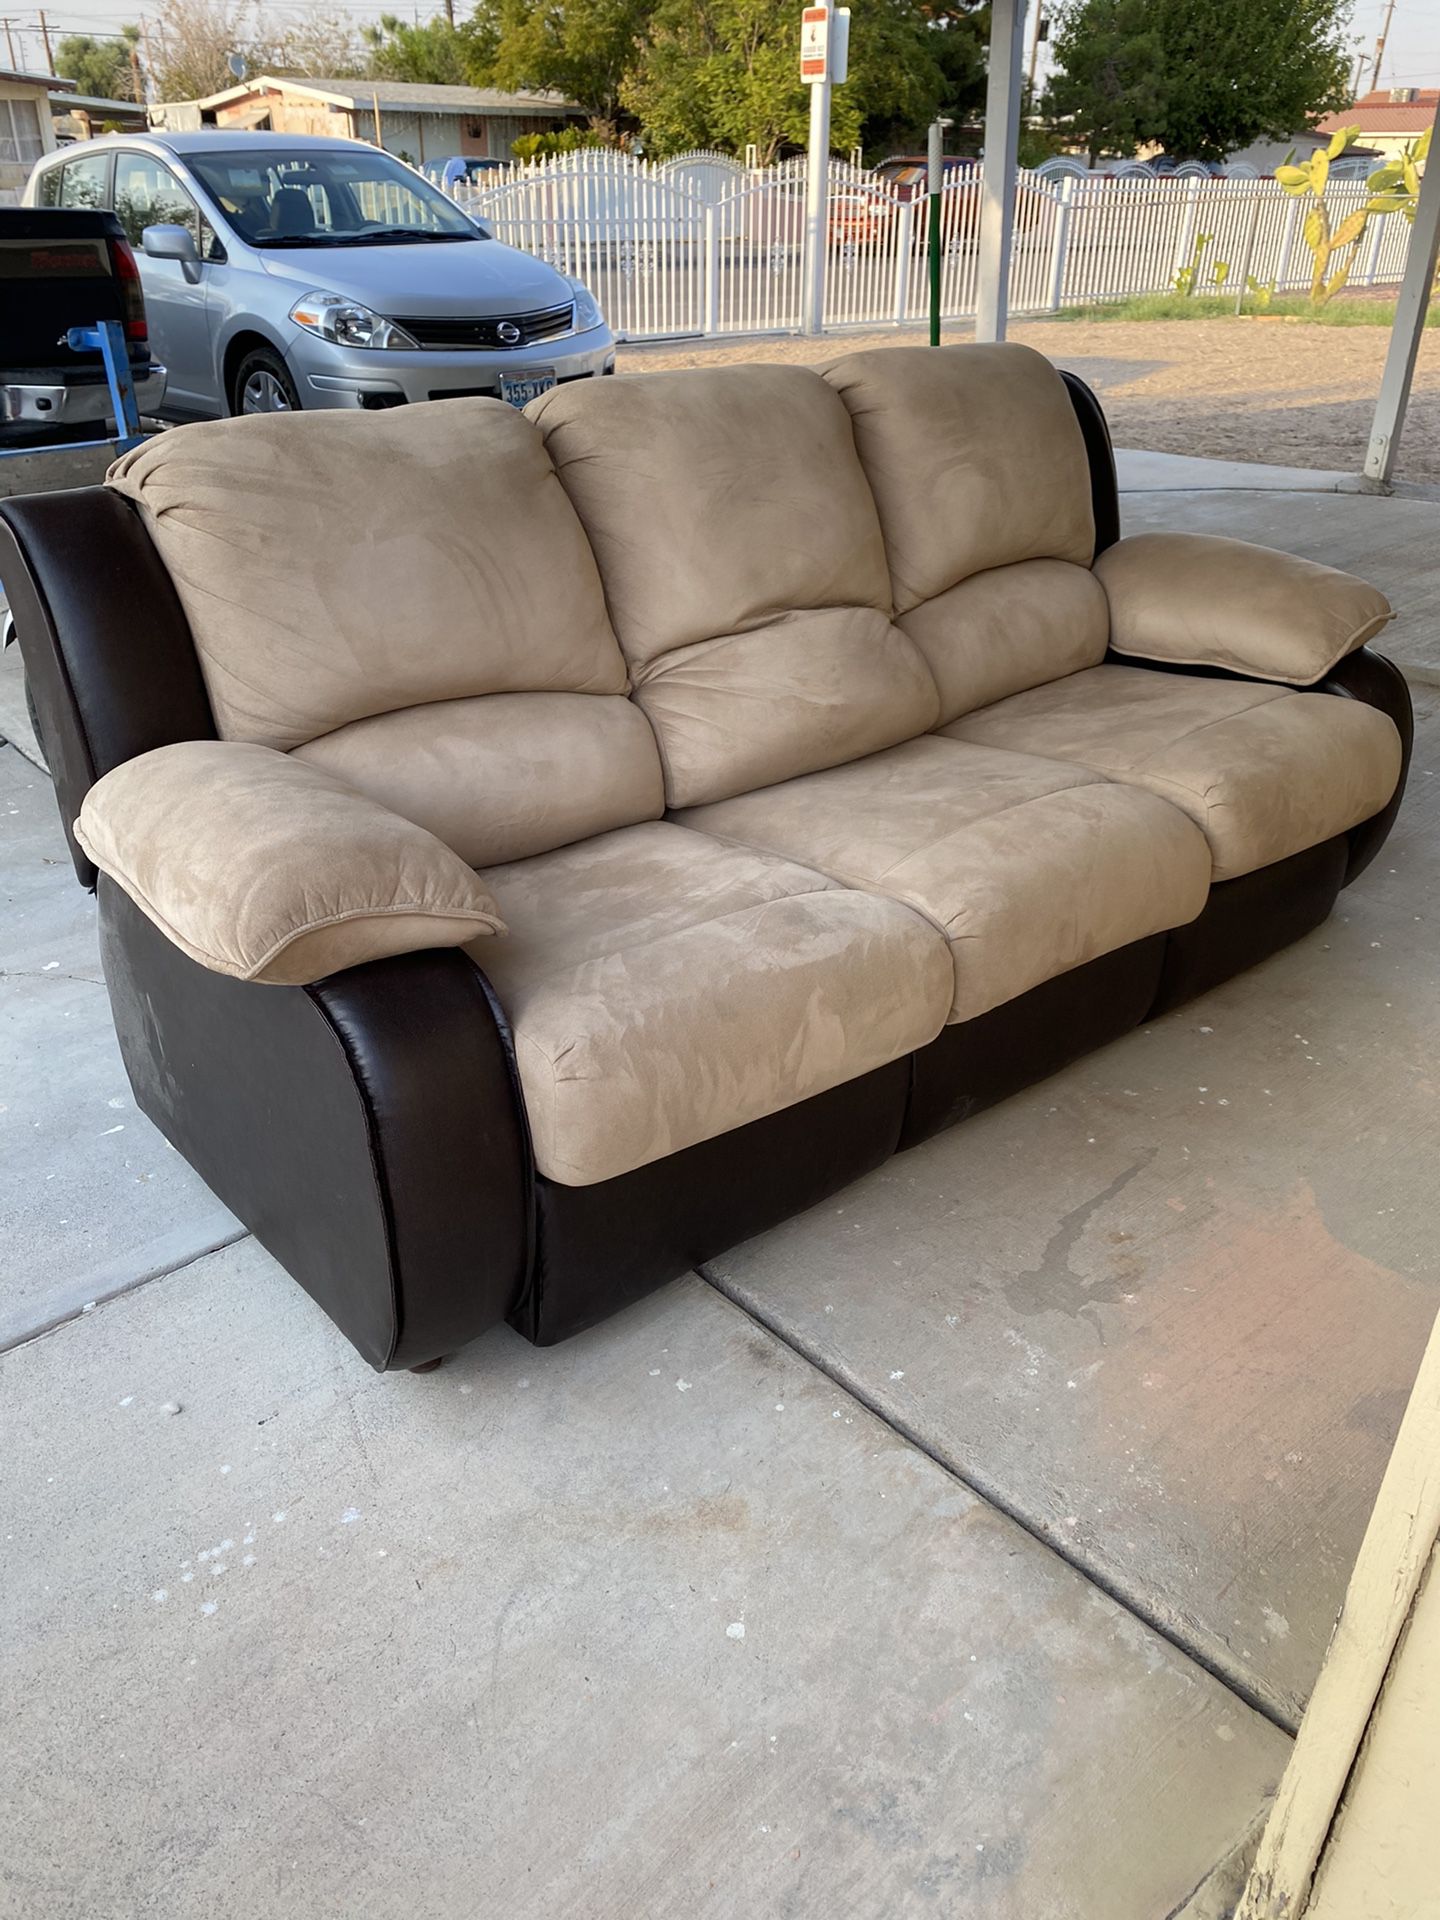 Sofa Bed couch . Great condition